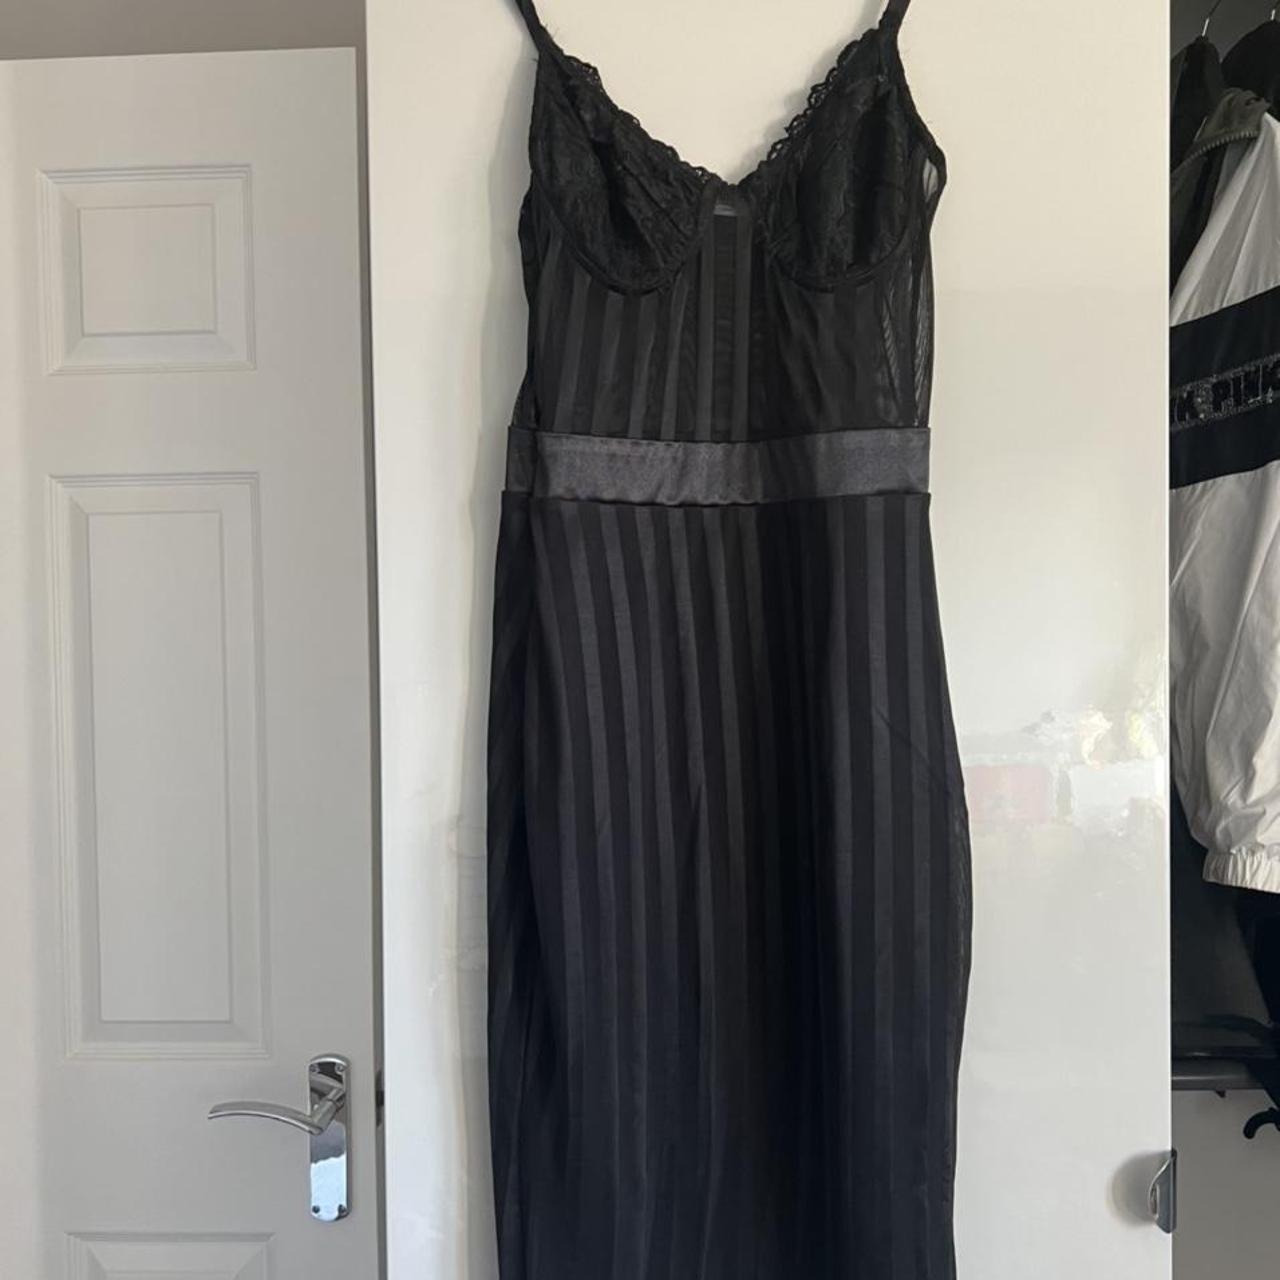 Black maxi dress bought from PLT a few years ago,... - Depop